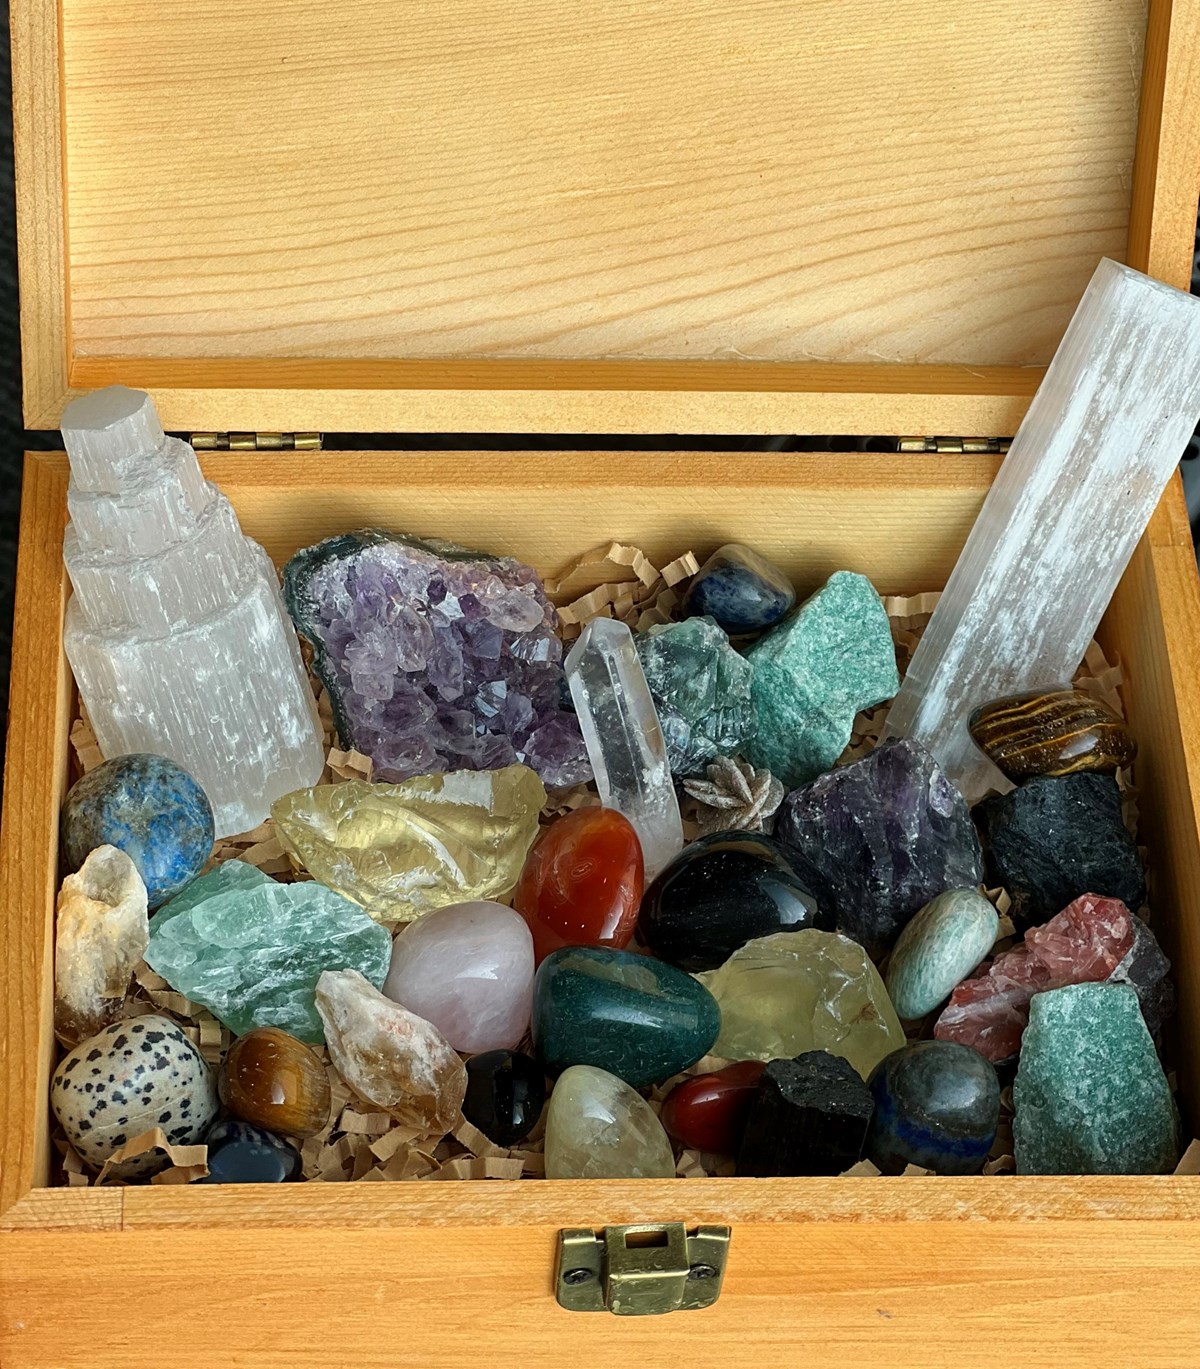 Several multicolored crystals sitting in wooden box